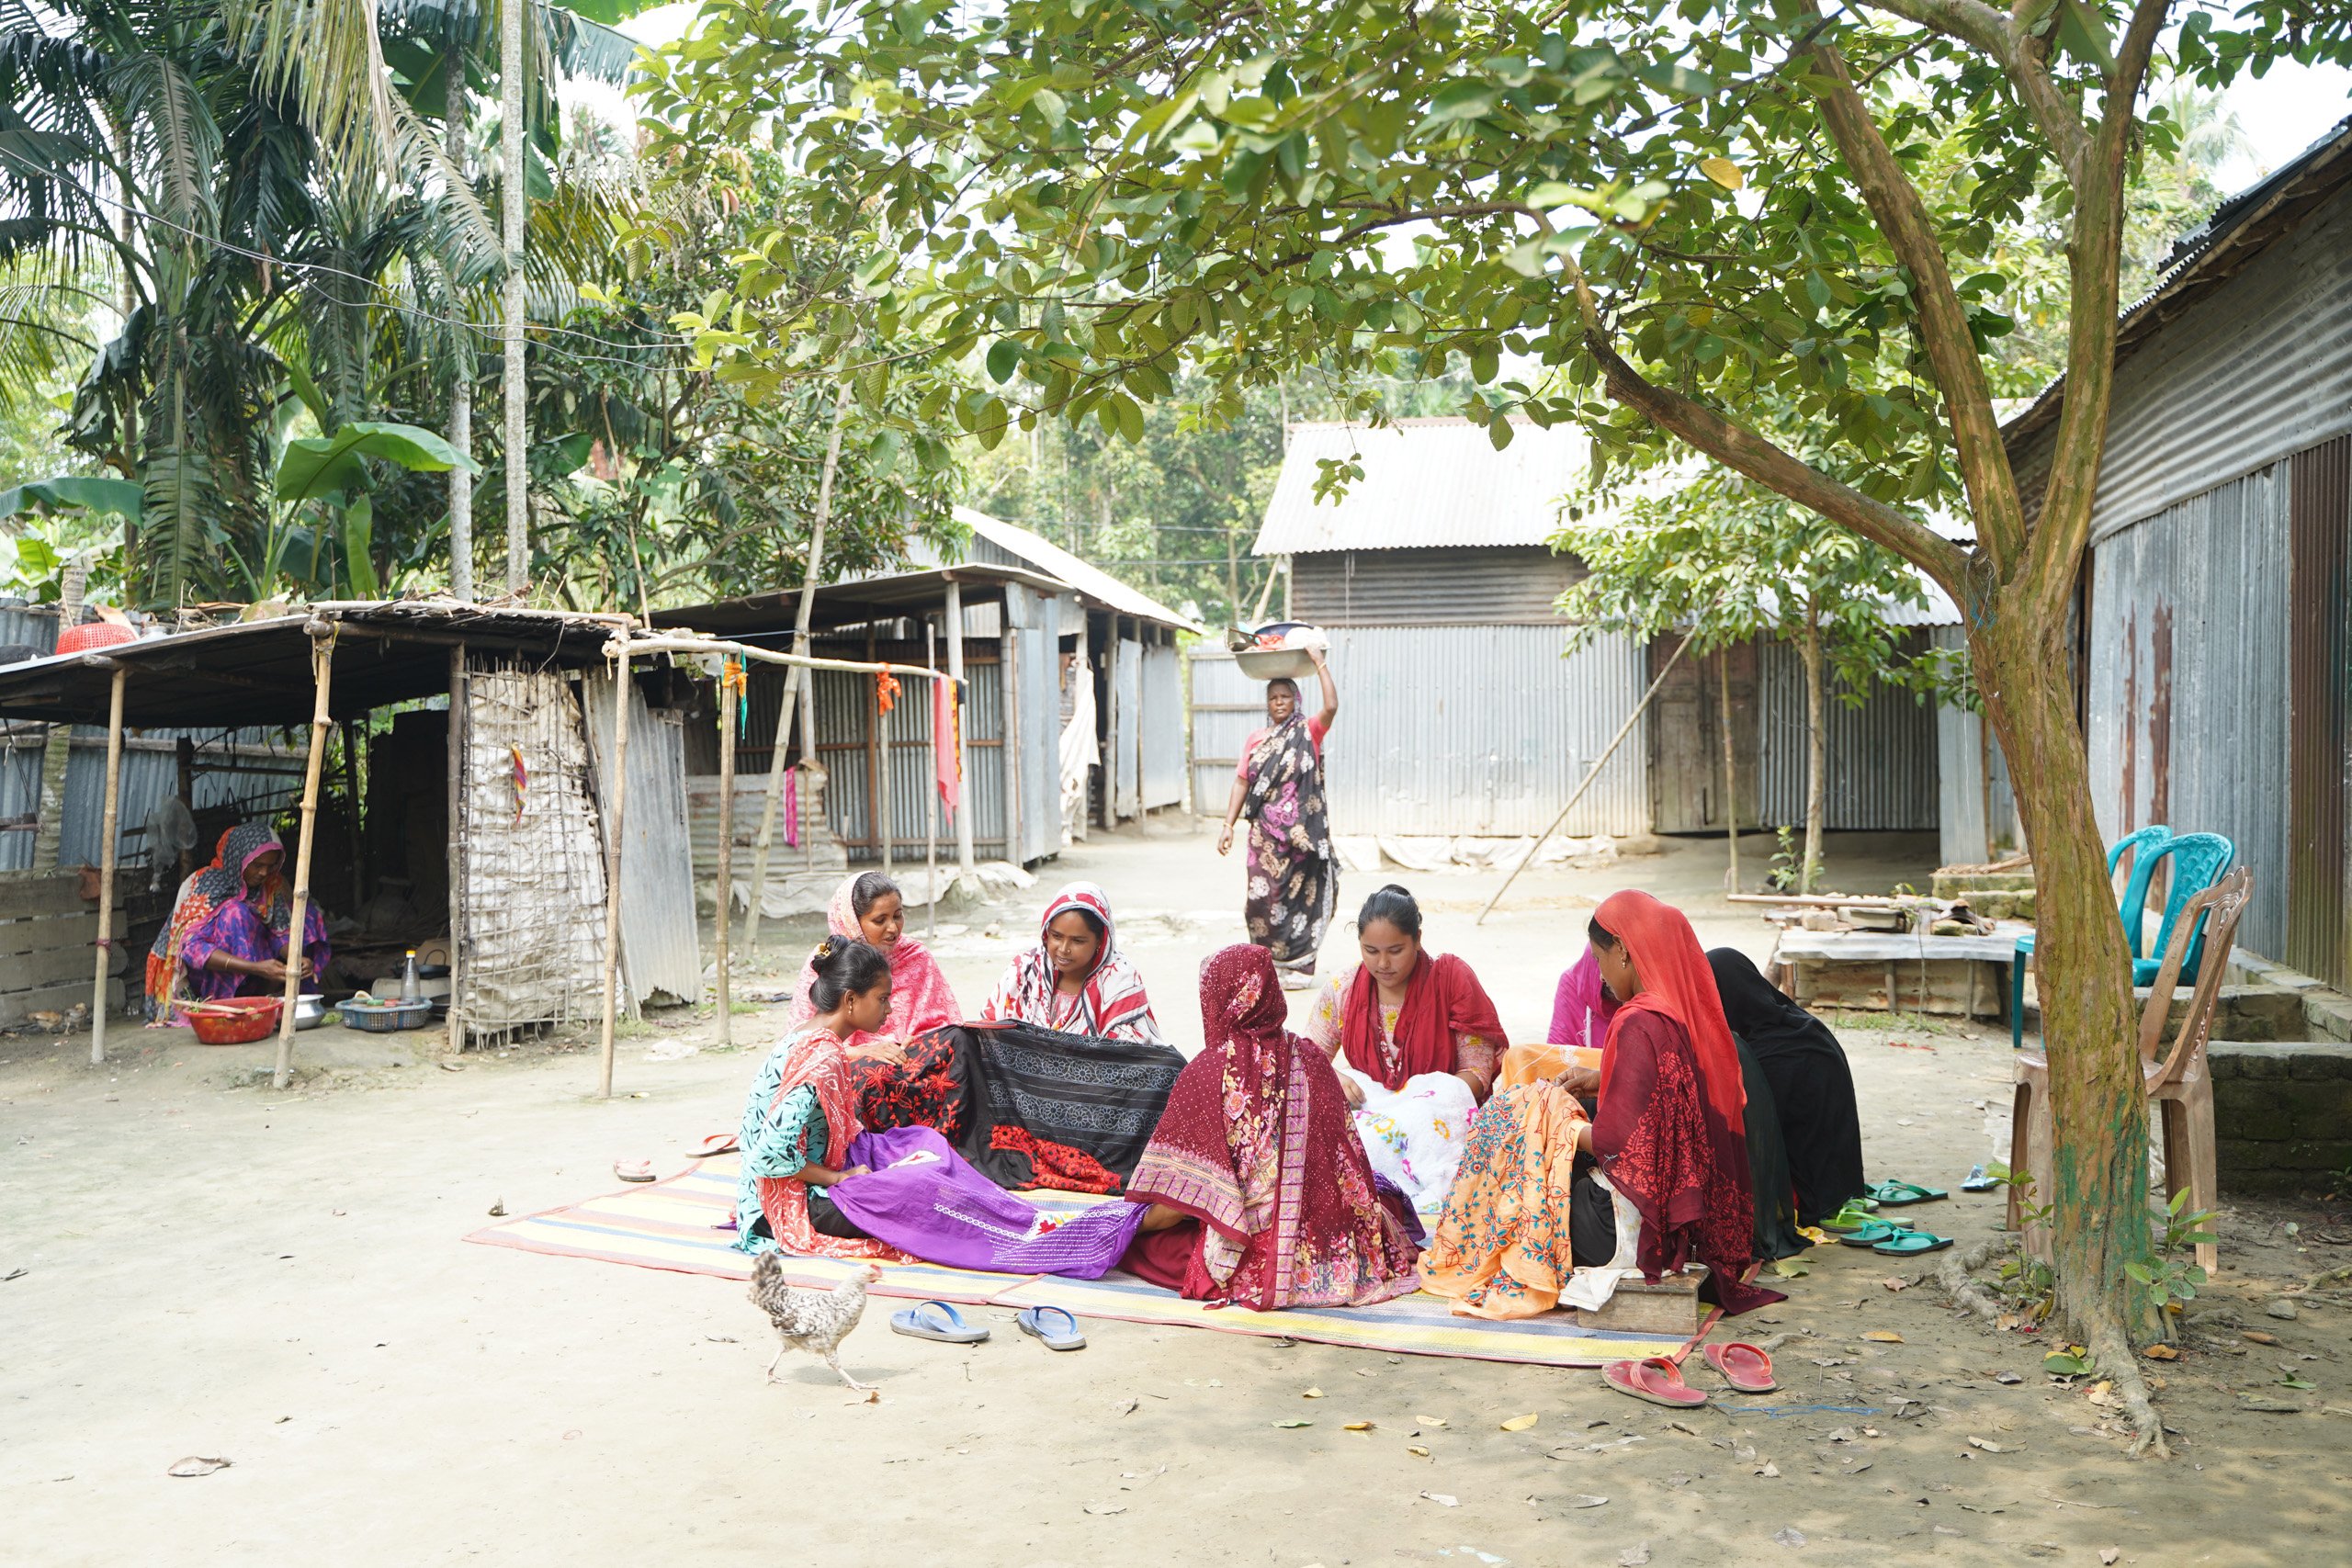 group of women sitting under tree with cloth, sewing